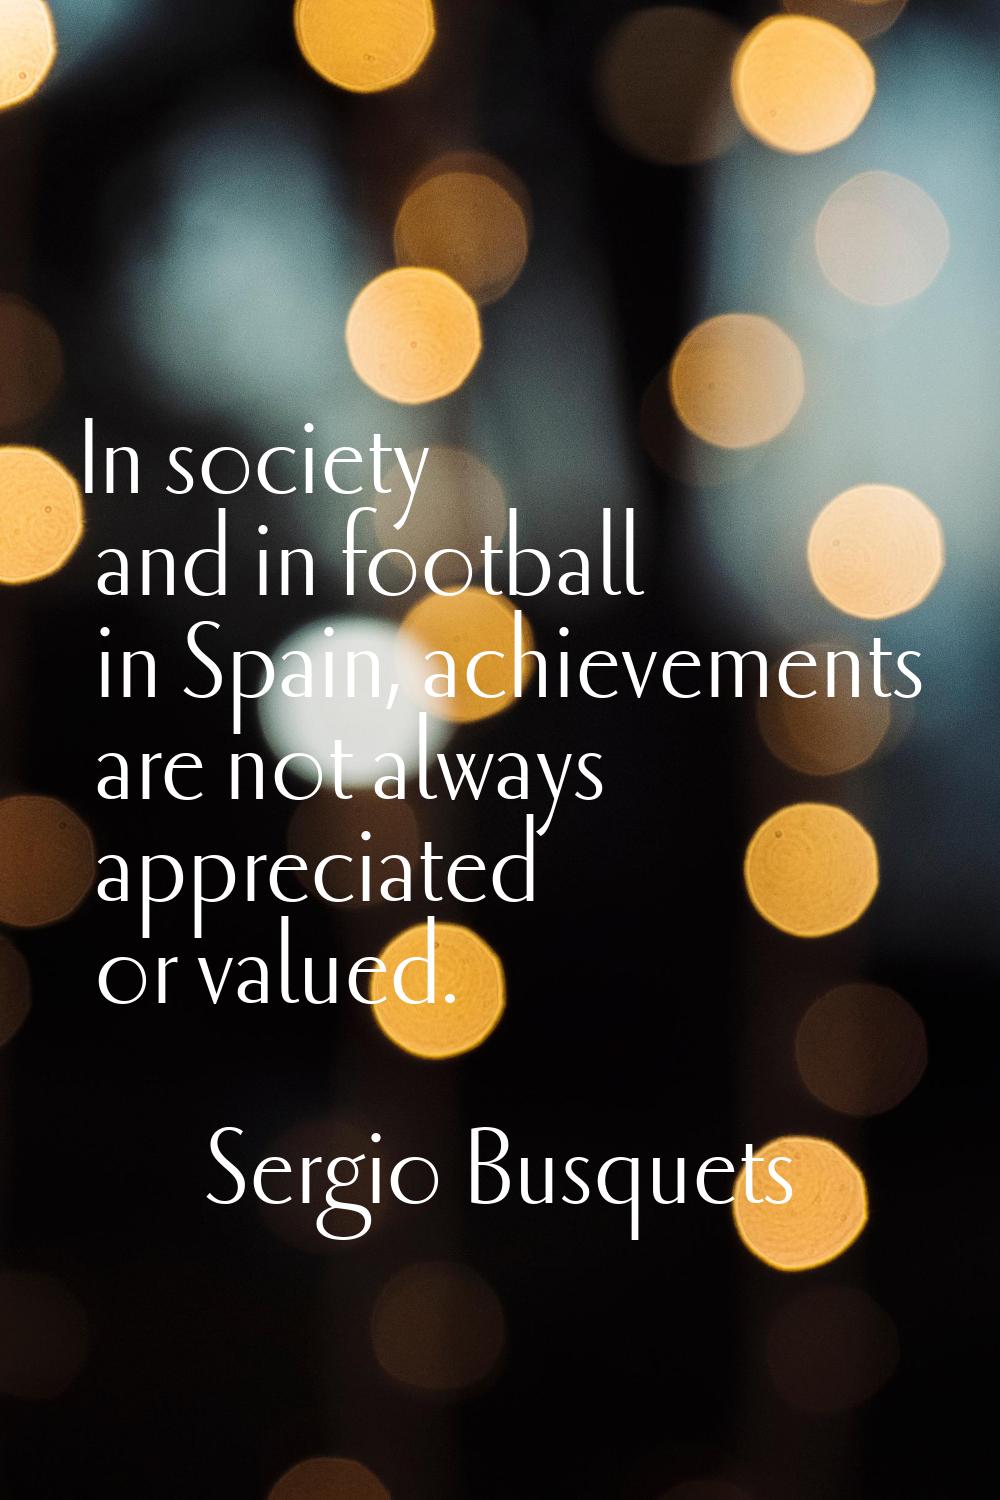 In society and in football in Spain, achievements are not always appreciated or valued.